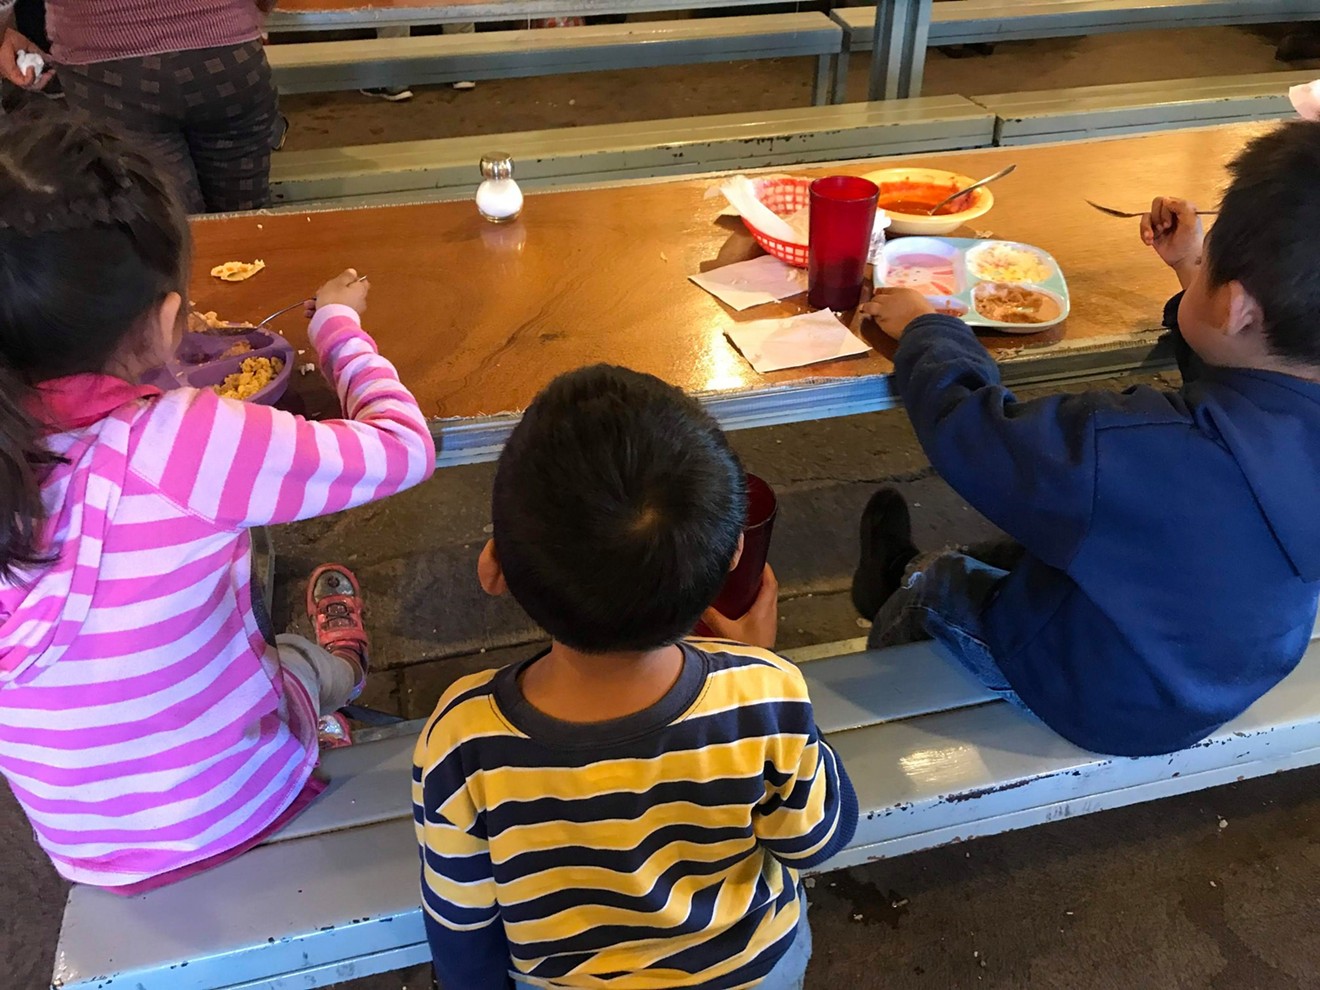 Children receive meals at Kino Border Initiative's aid center for migrants in Nogales, Sonora.